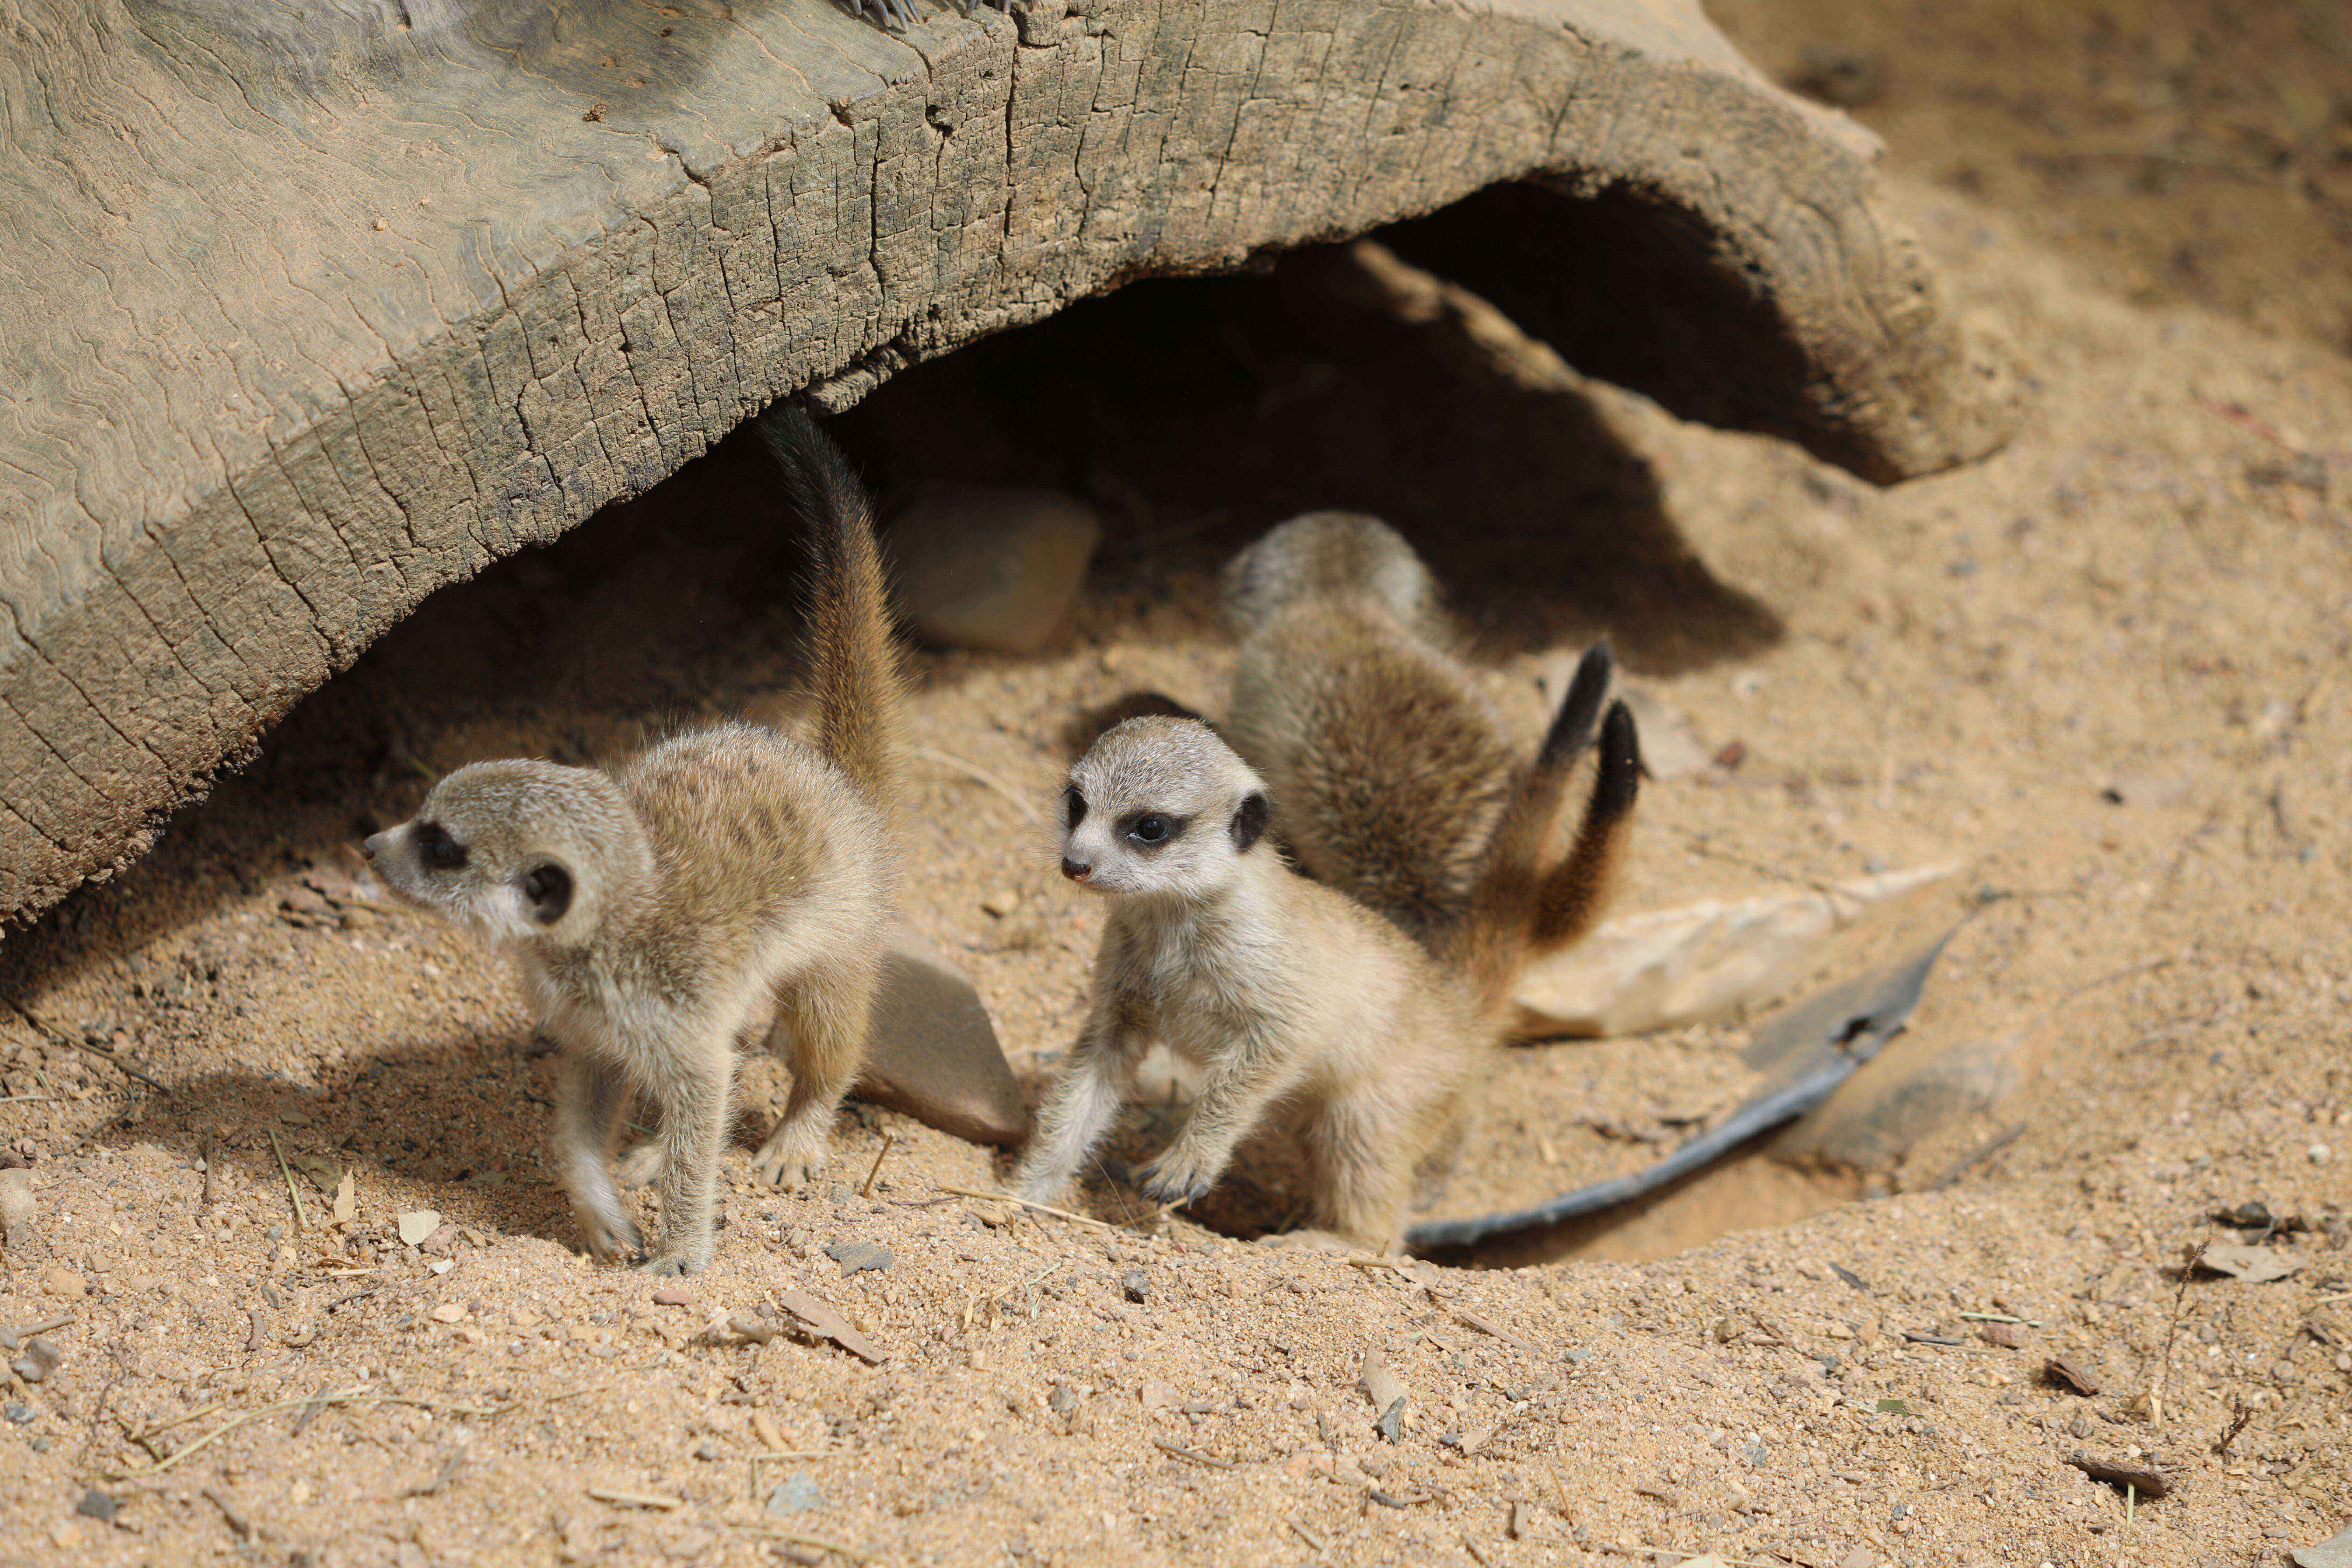 Meerkat triplets born at Canberra’s zoo